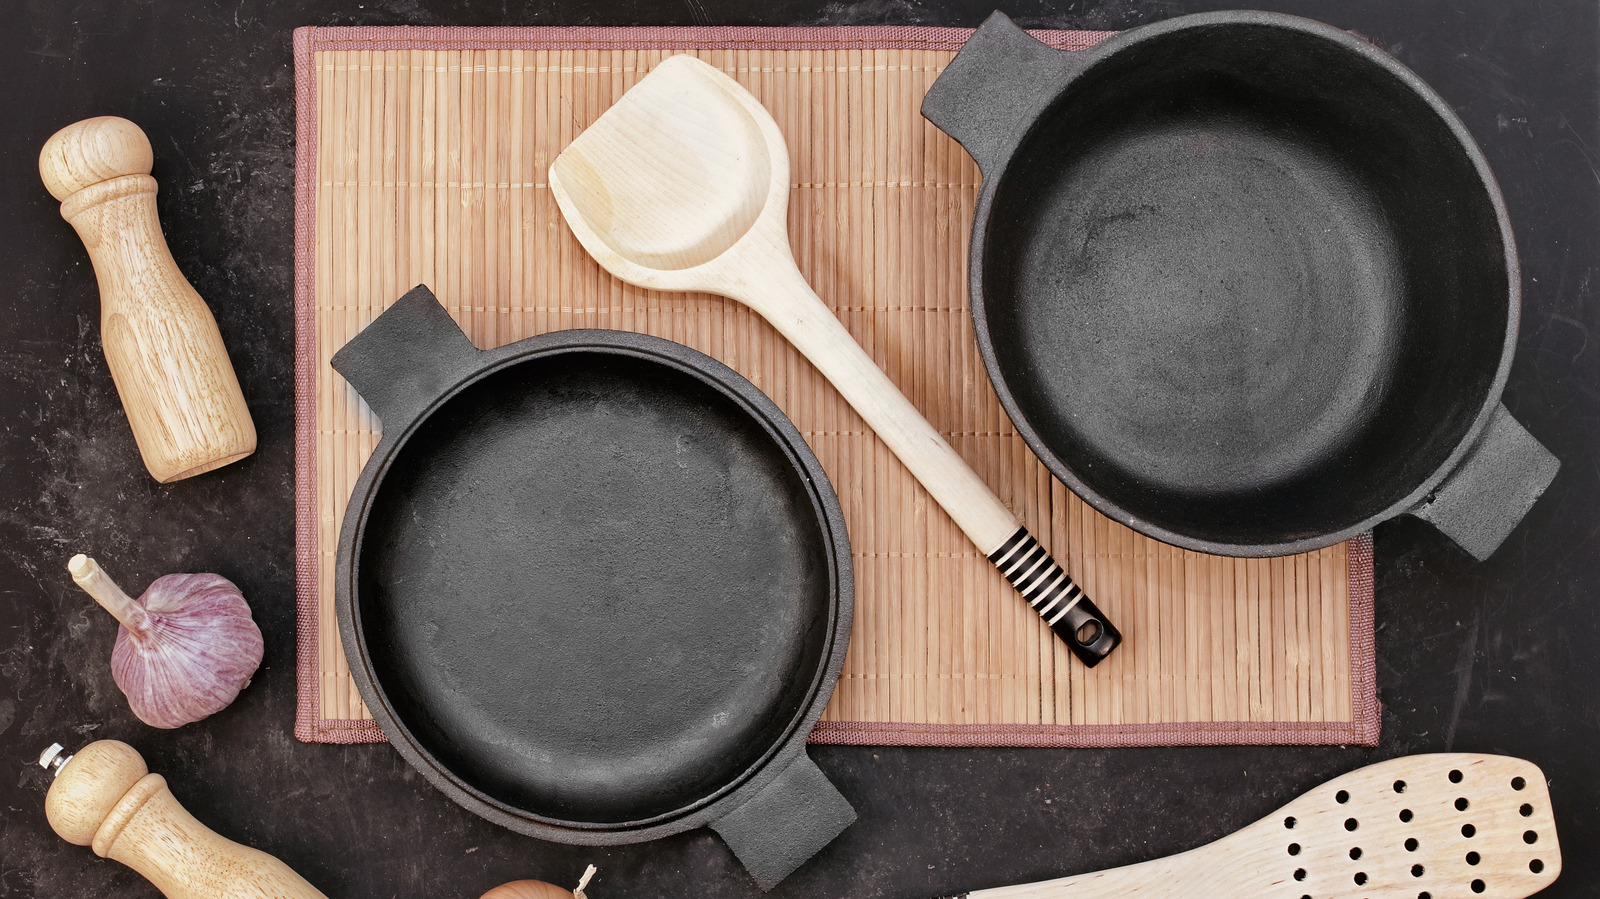 https://www.tastingtable.com/img/gallery/why-its-better-to-use-moderate-heat-with-cast-iron-skillets/l-intro-1650990150.jpg